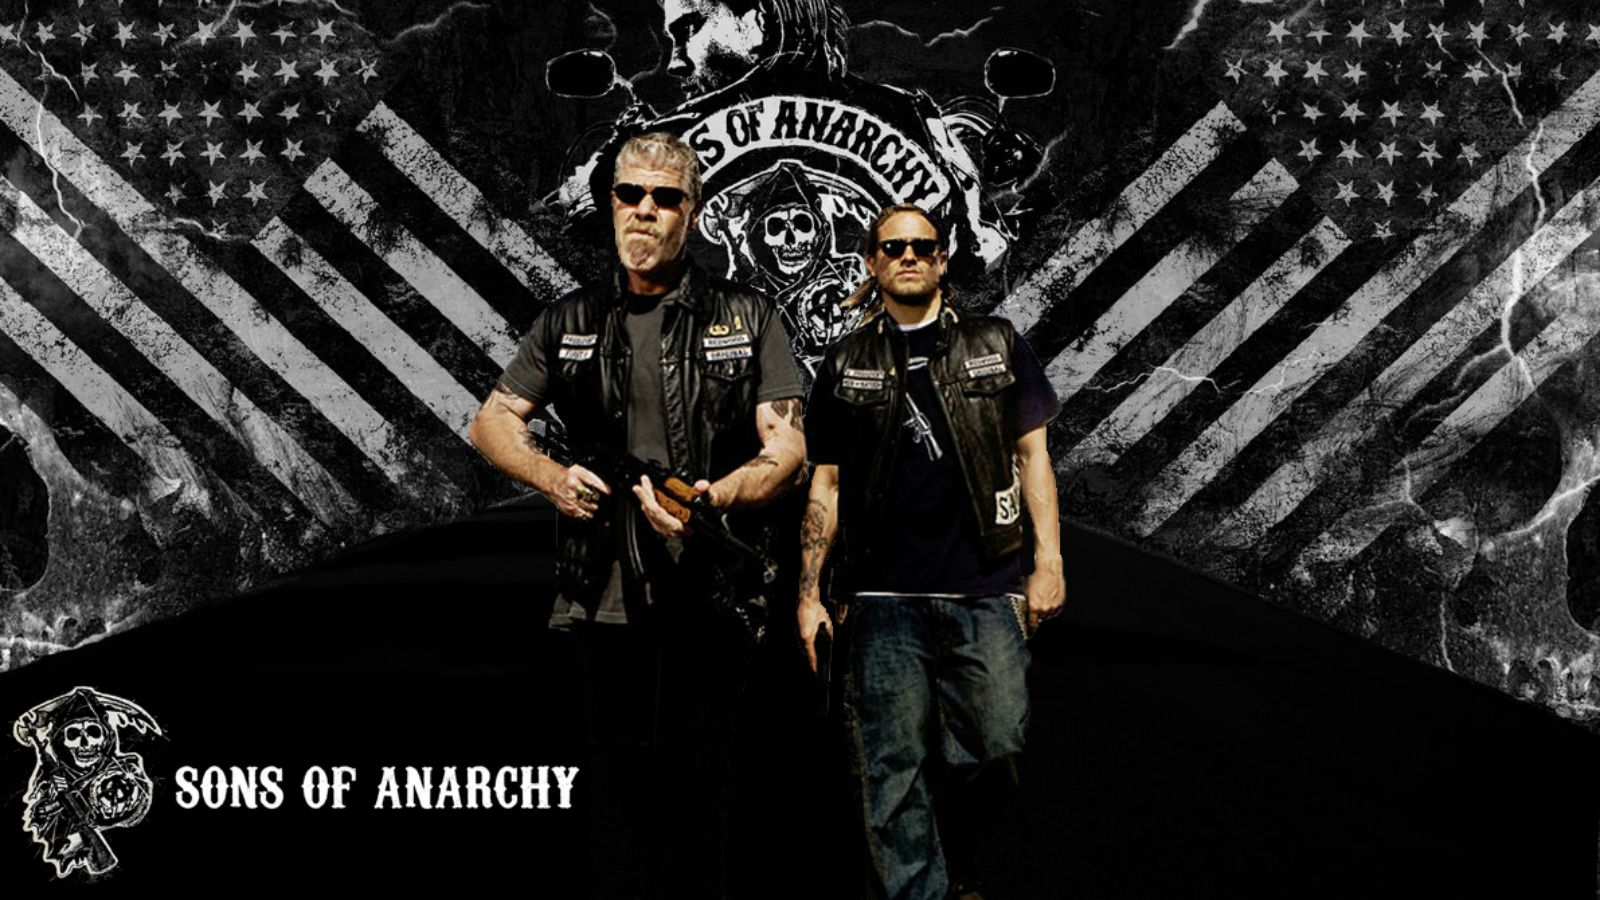 Sons of anarchy Computer Wallpapers, Desktop Backgrounds